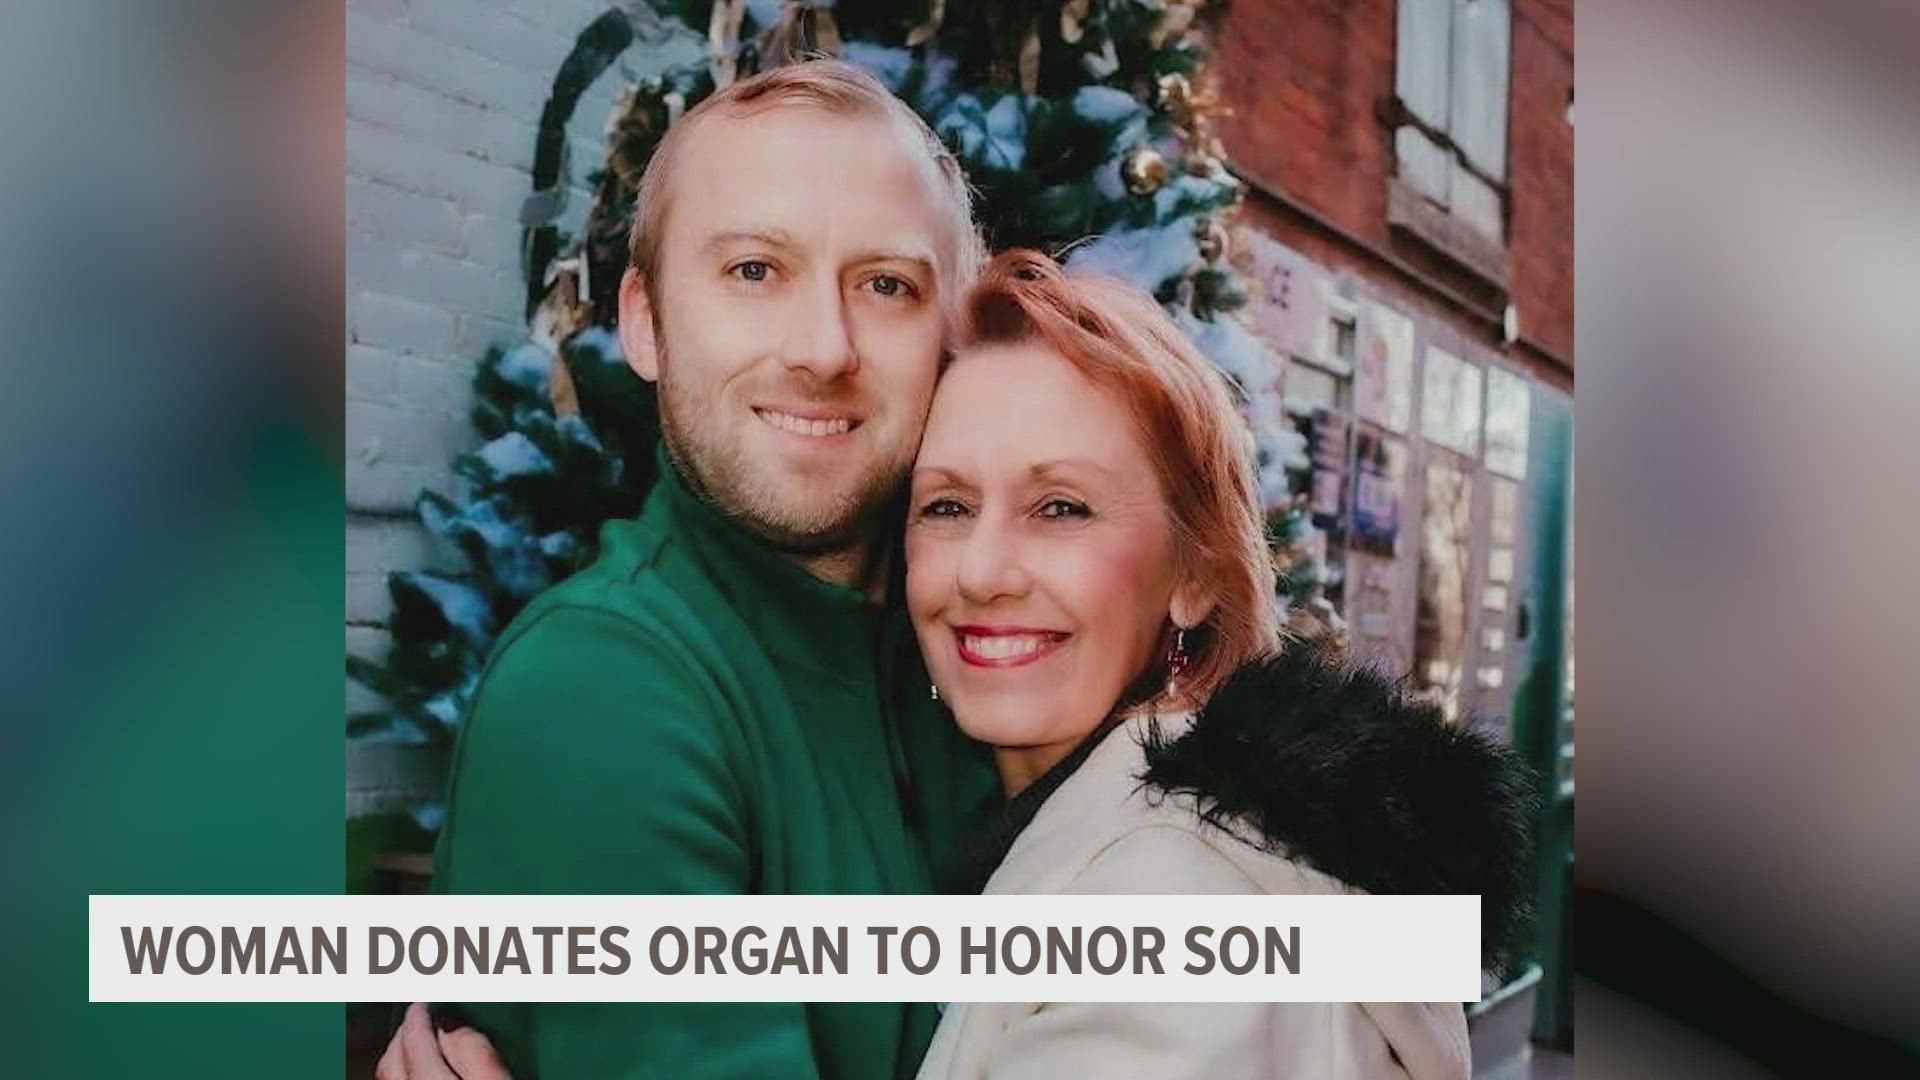 A woman whose son died of colon cancer decided to honor him by donating her kidney. It was her way of making sure another person had a better quality of life.